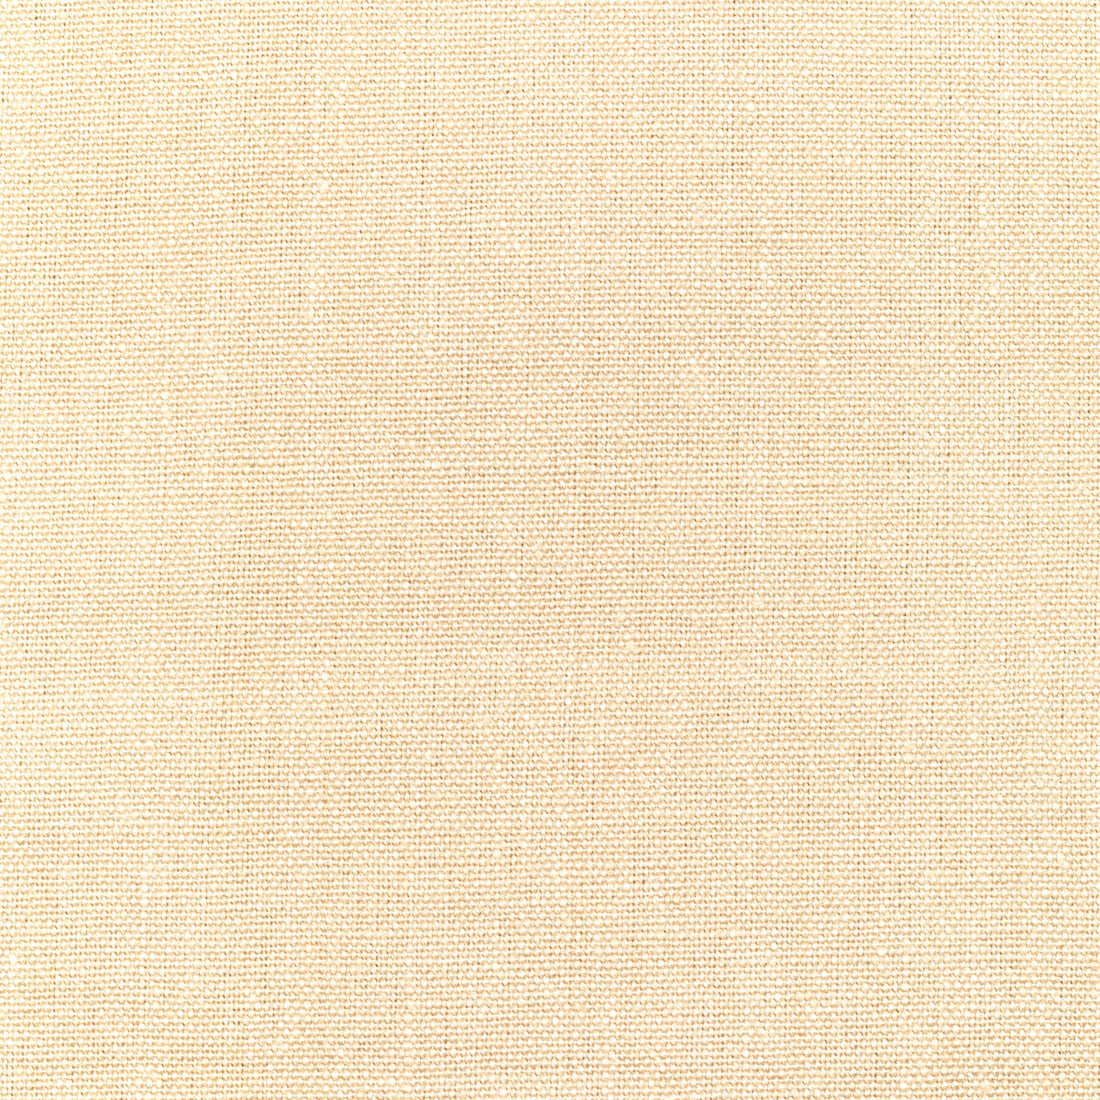 Watermill Linen fabric in cream color - pattern 2012176.1.0 - by Lee Jofa in the Colour Complements II collection